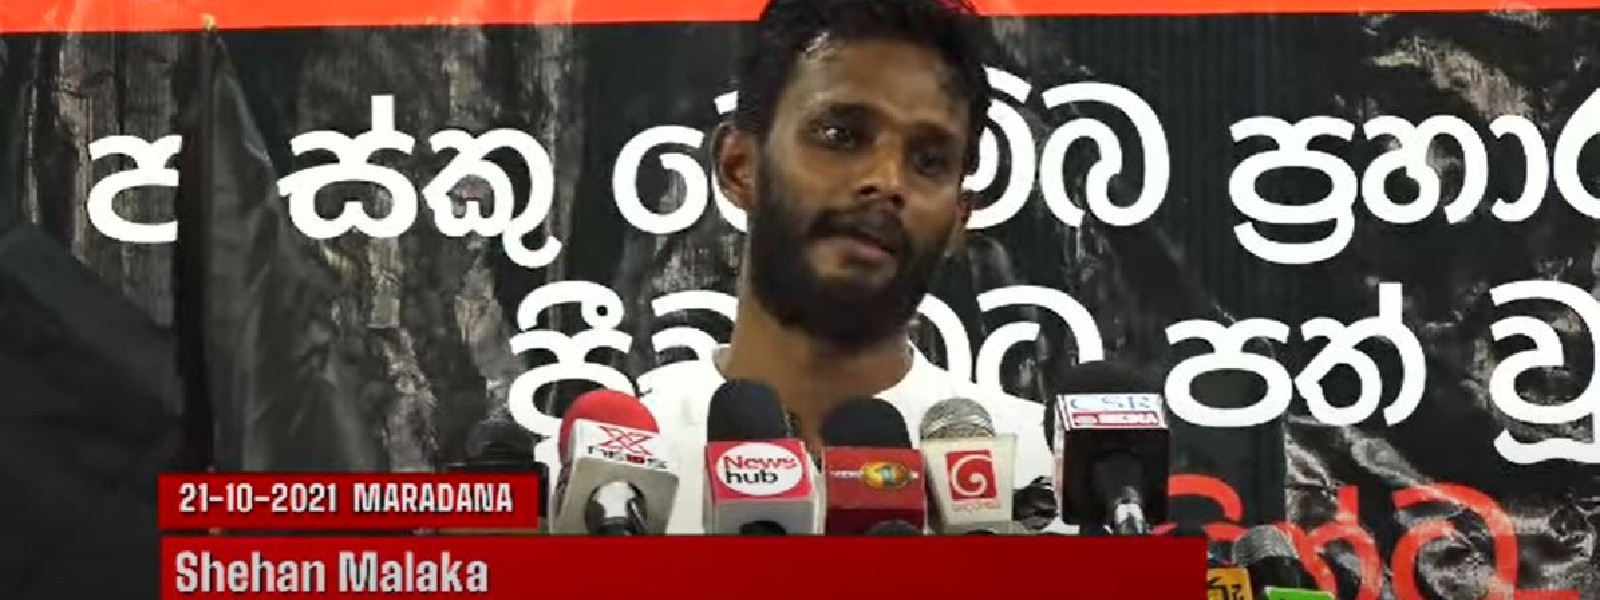 Activist Shehan Malaka granted bail, day after he was arrested by CID in the street